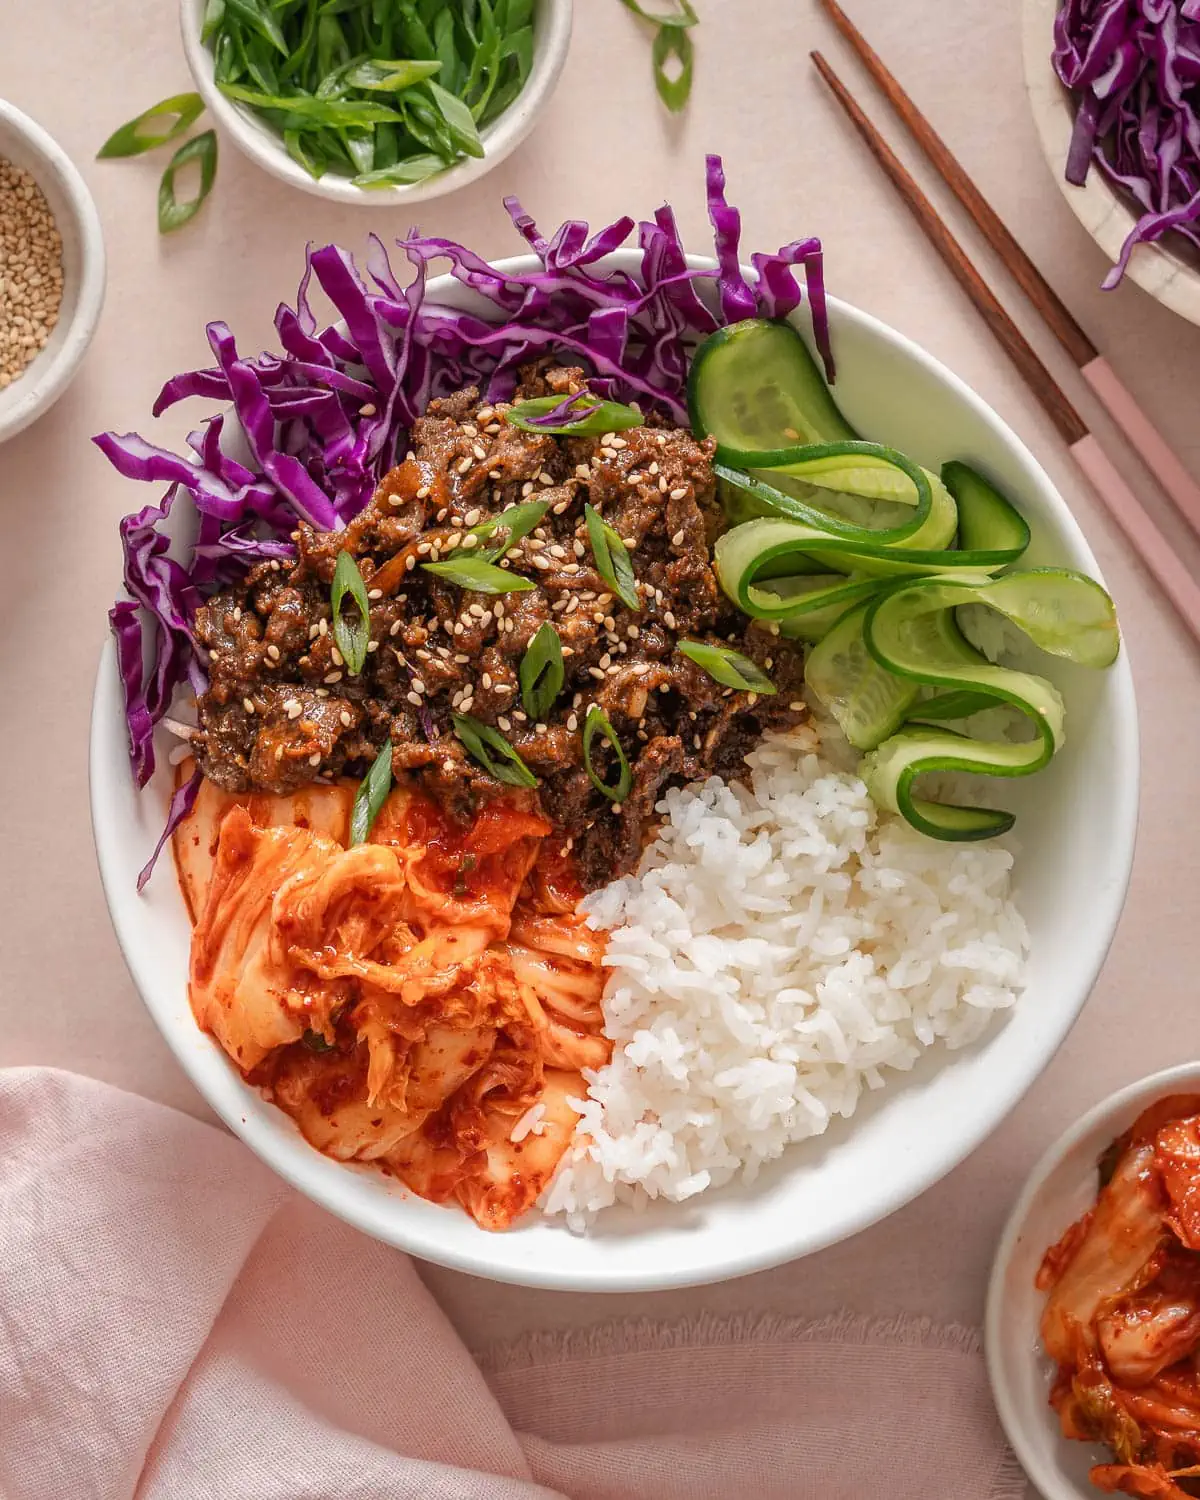 A top down view of a bulgogi bowl with various vegetable sides, kimchi, and rice.